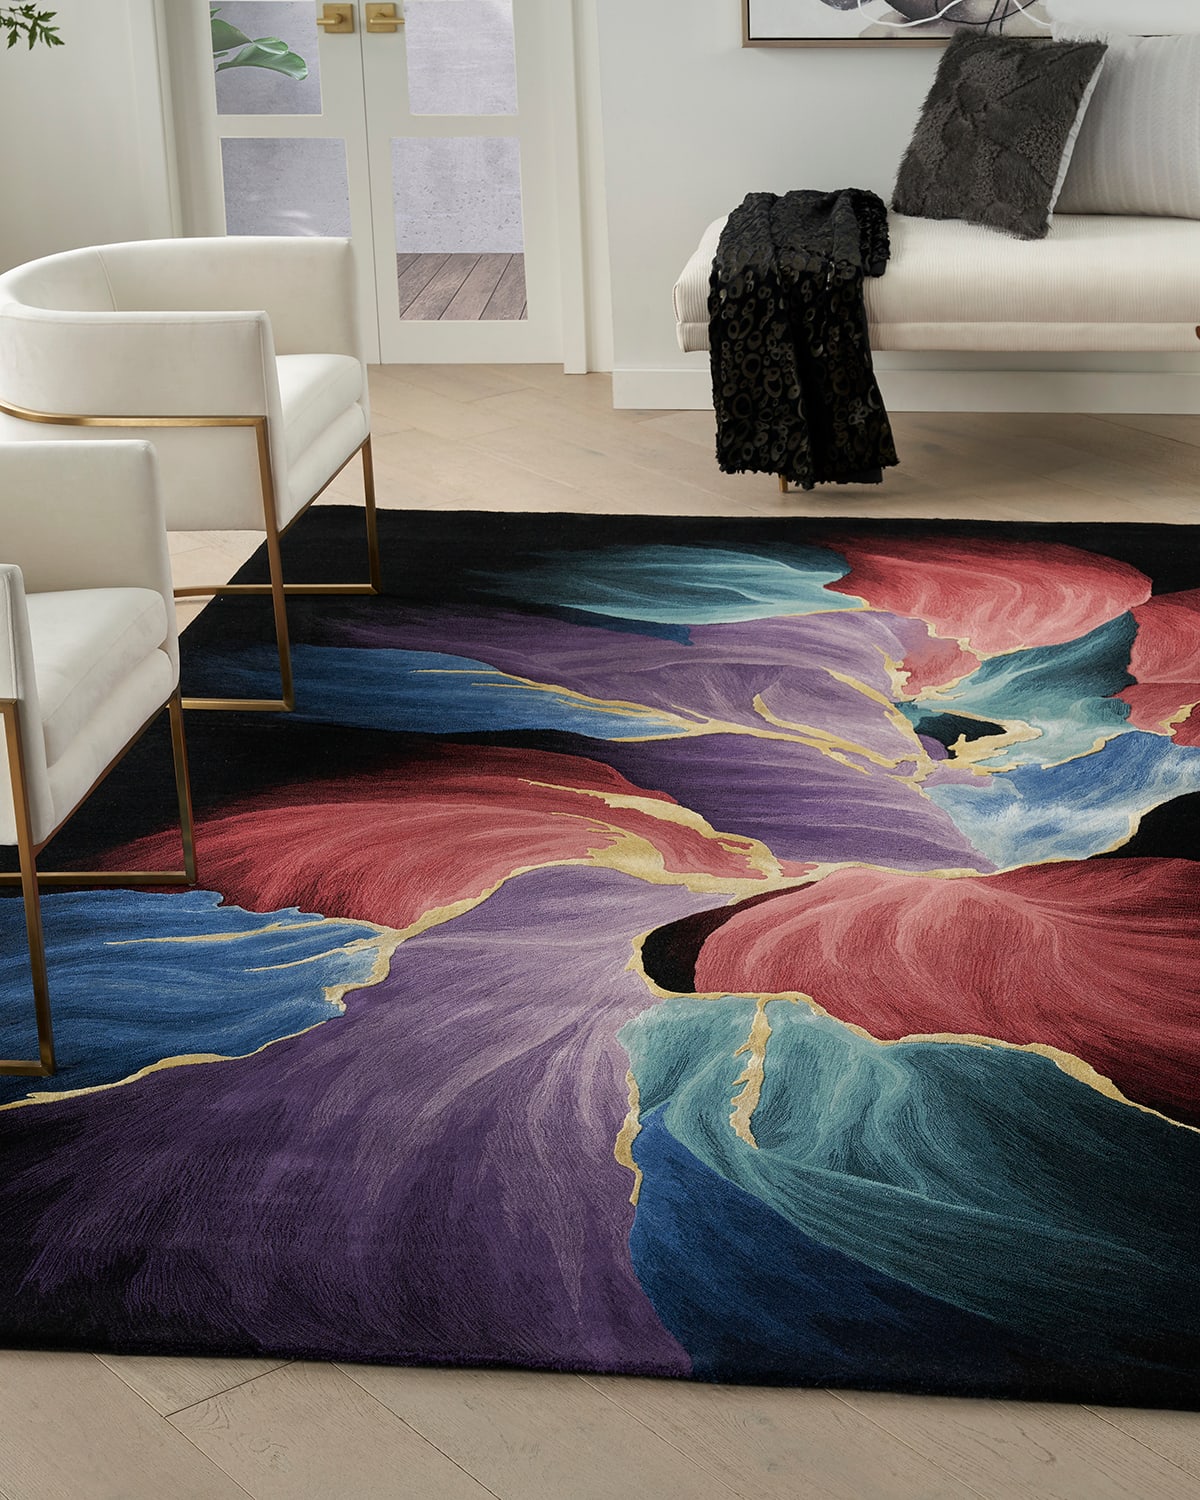 Petals in Black Hand-Tufted Rug, 9' x 12'